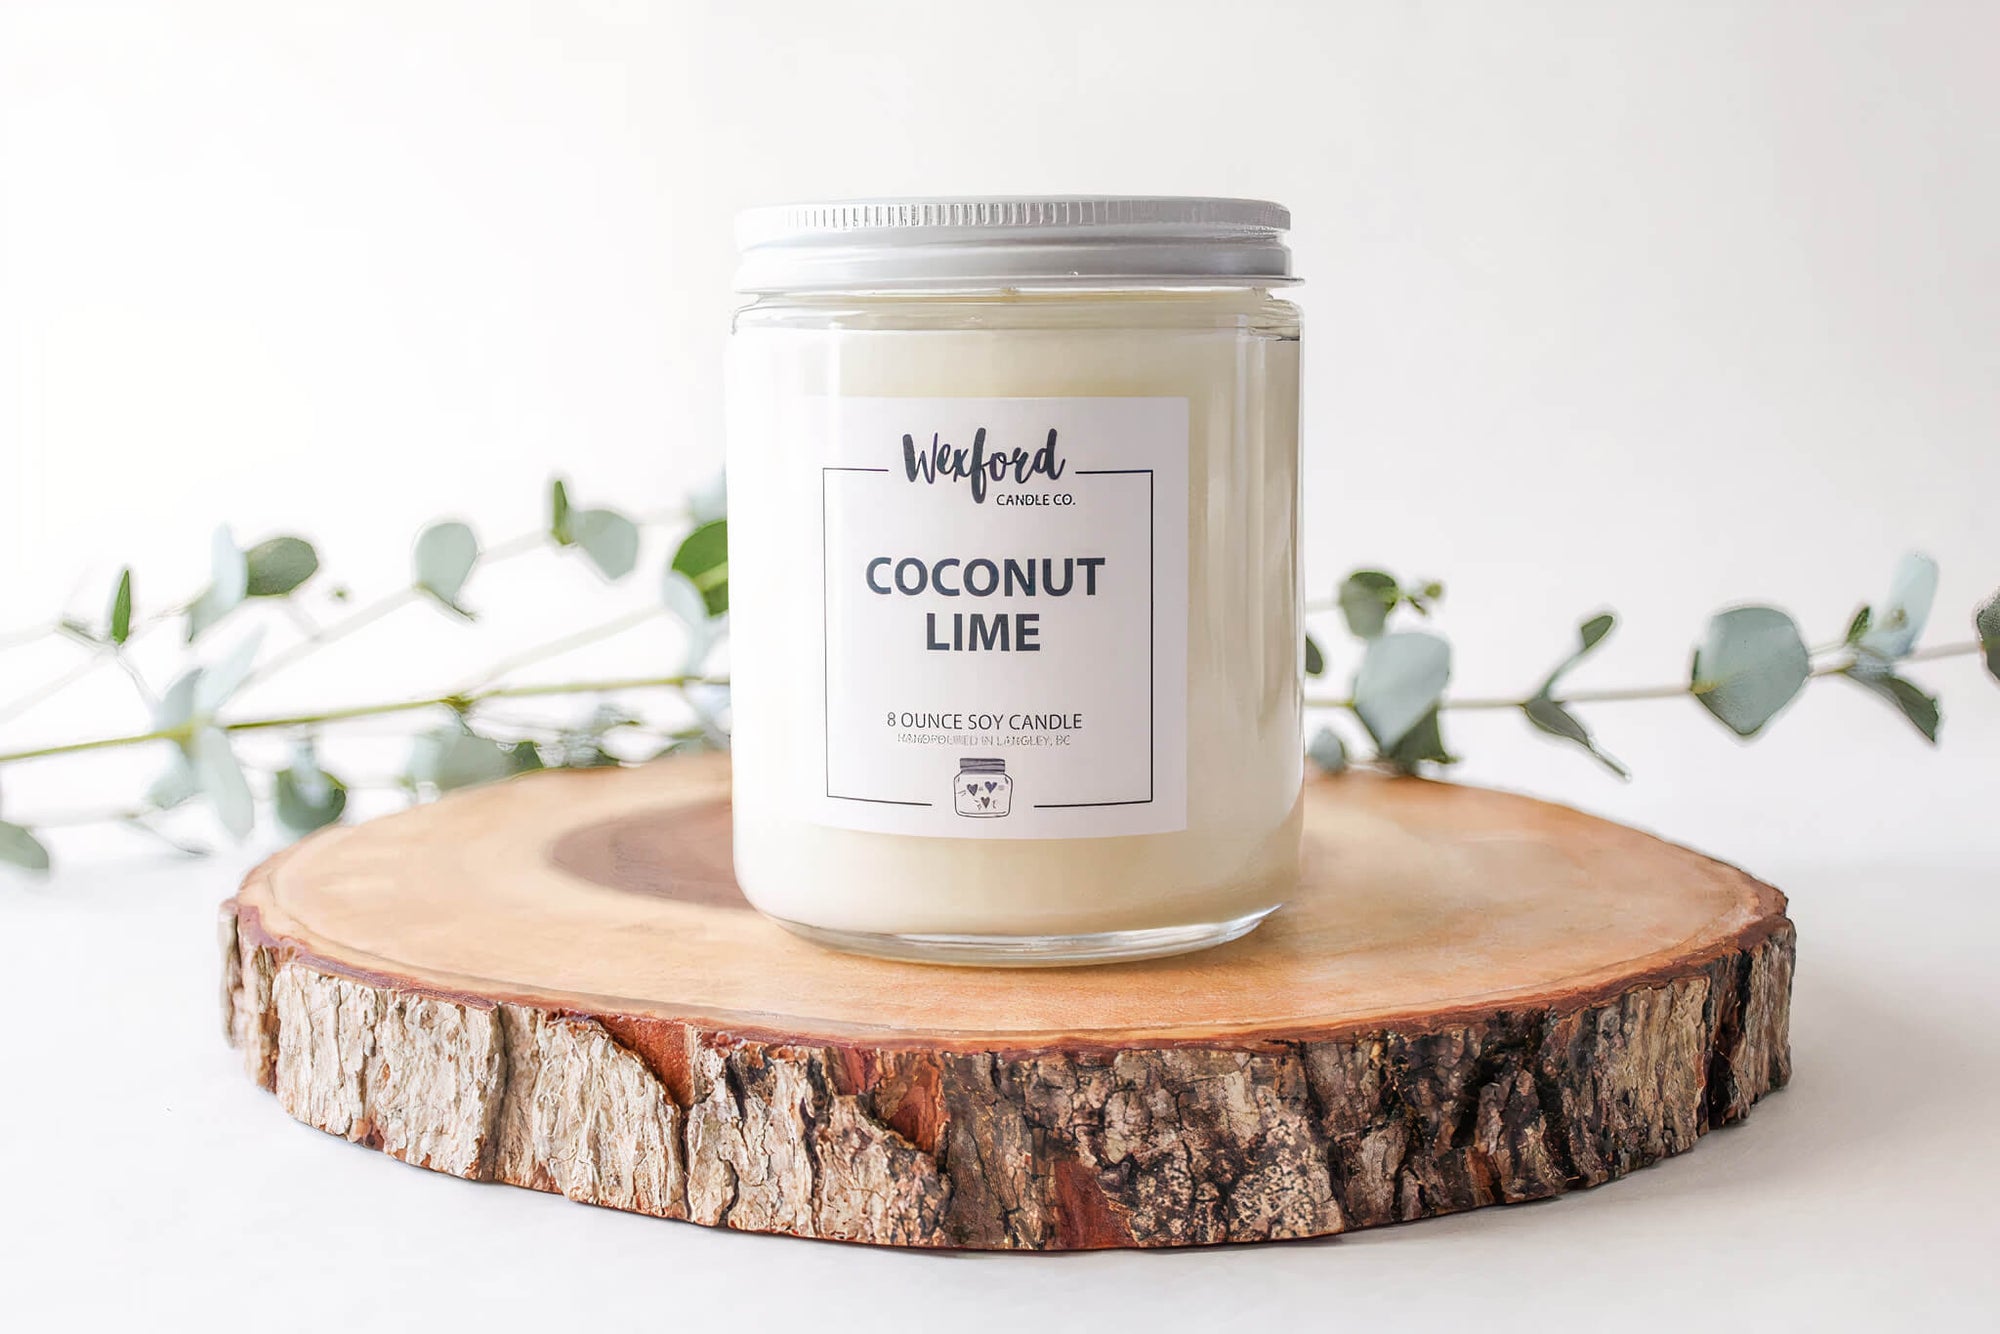 Wexford Candles | Coconut Lime Soy Candle